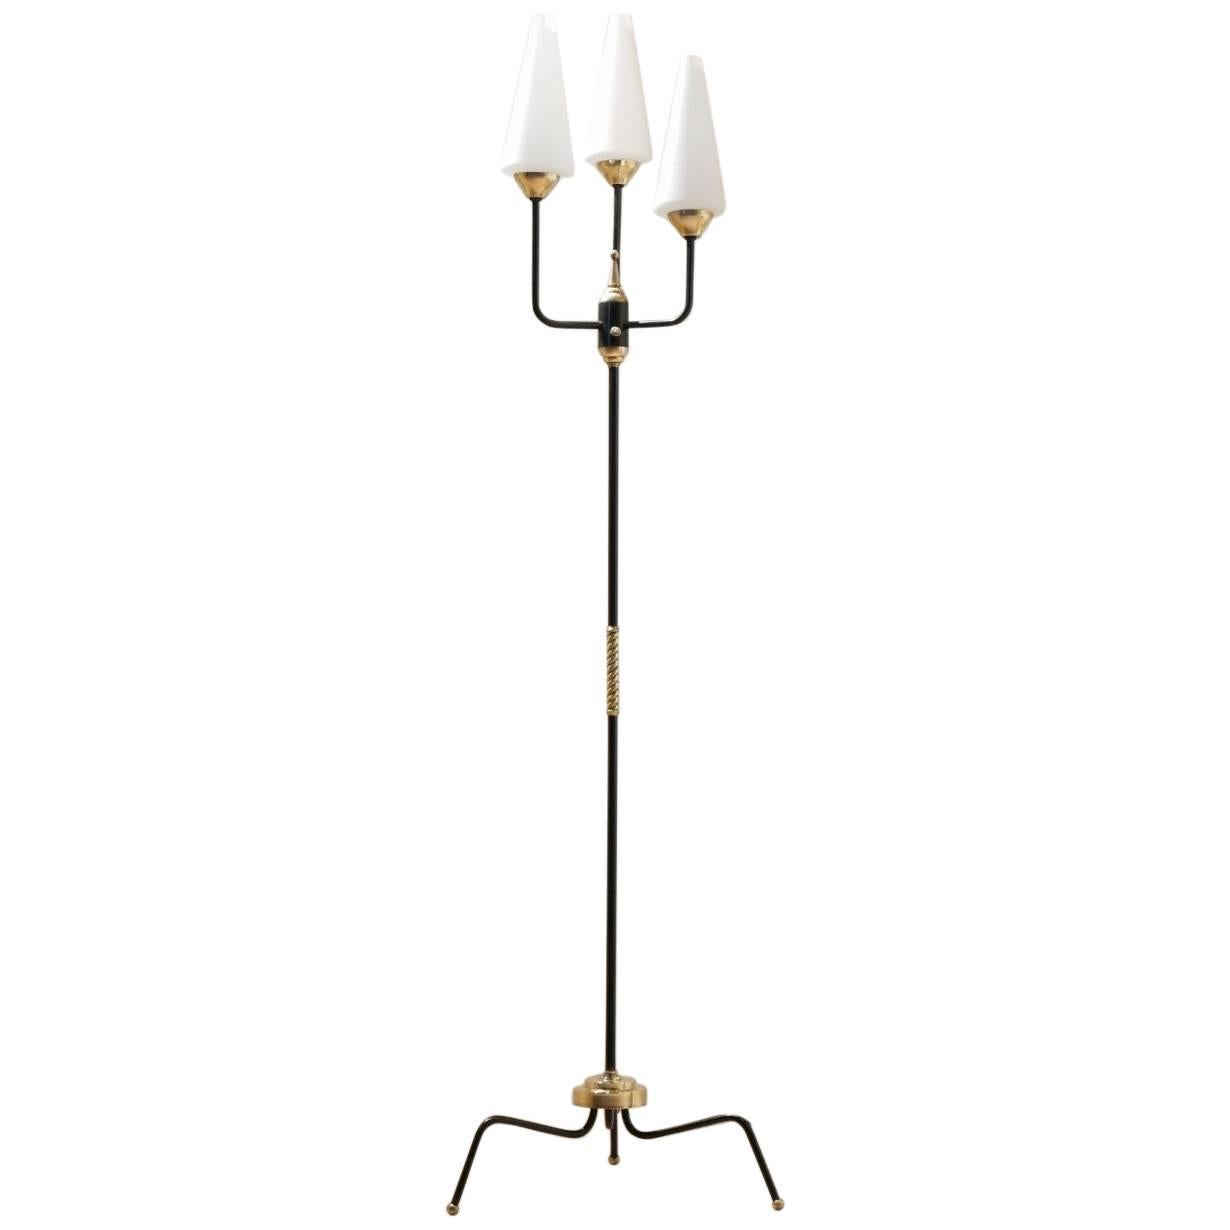 Midcentury French Maison Arlus Tripod Opalescent Glass and Brass Floor Lamp For Sale